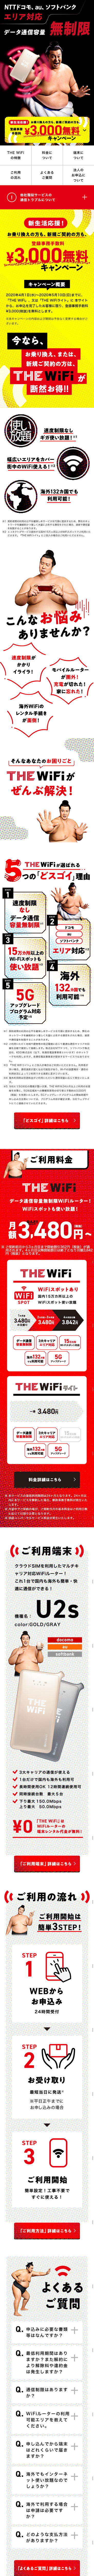 THEWiFi_sp_1